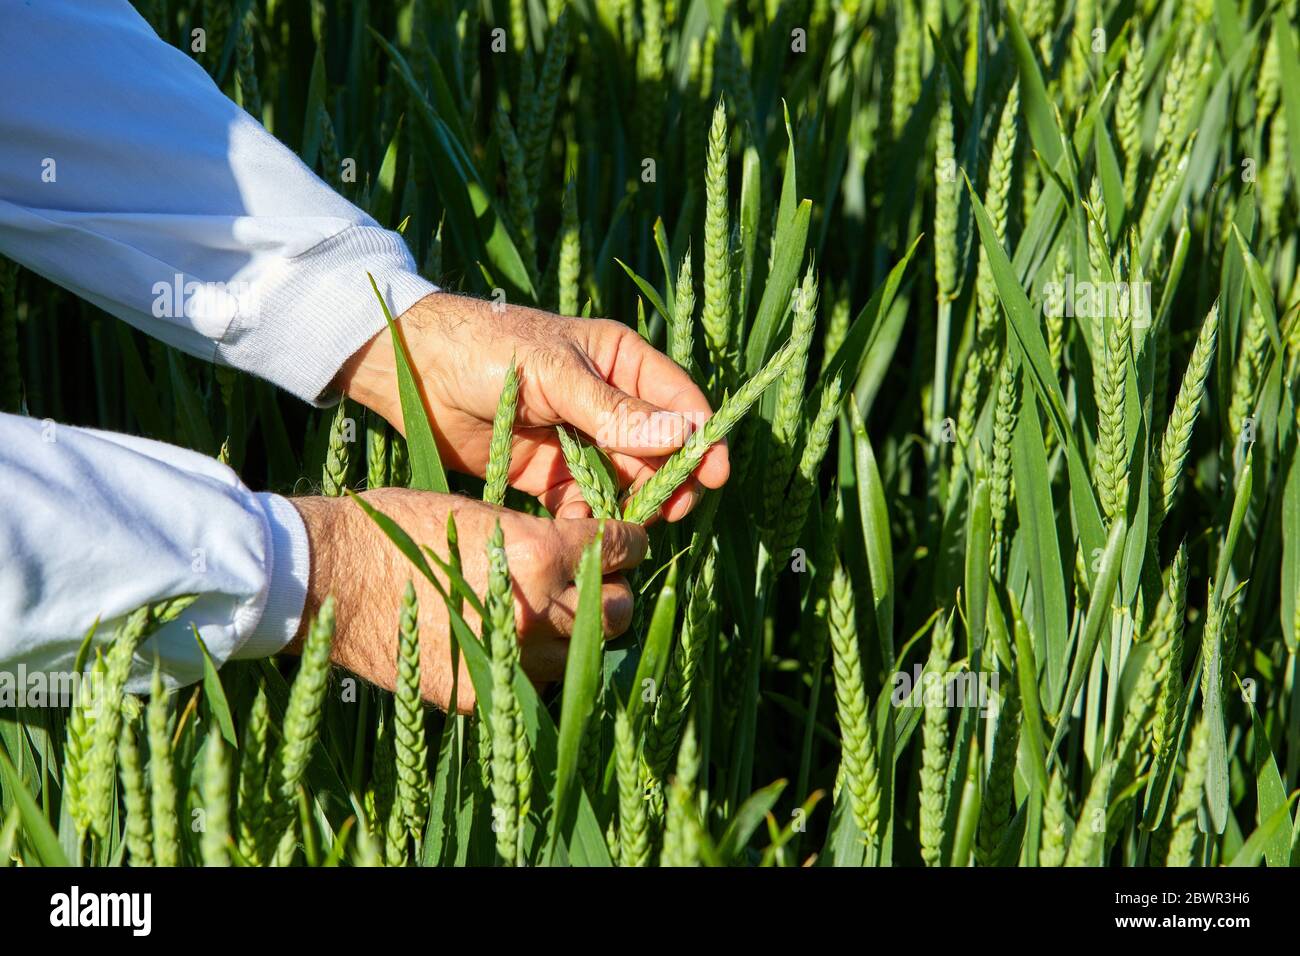 Cereal varieties cultivated for research, Agricultural field, Araba, Basque Country, Spain Stock Photo